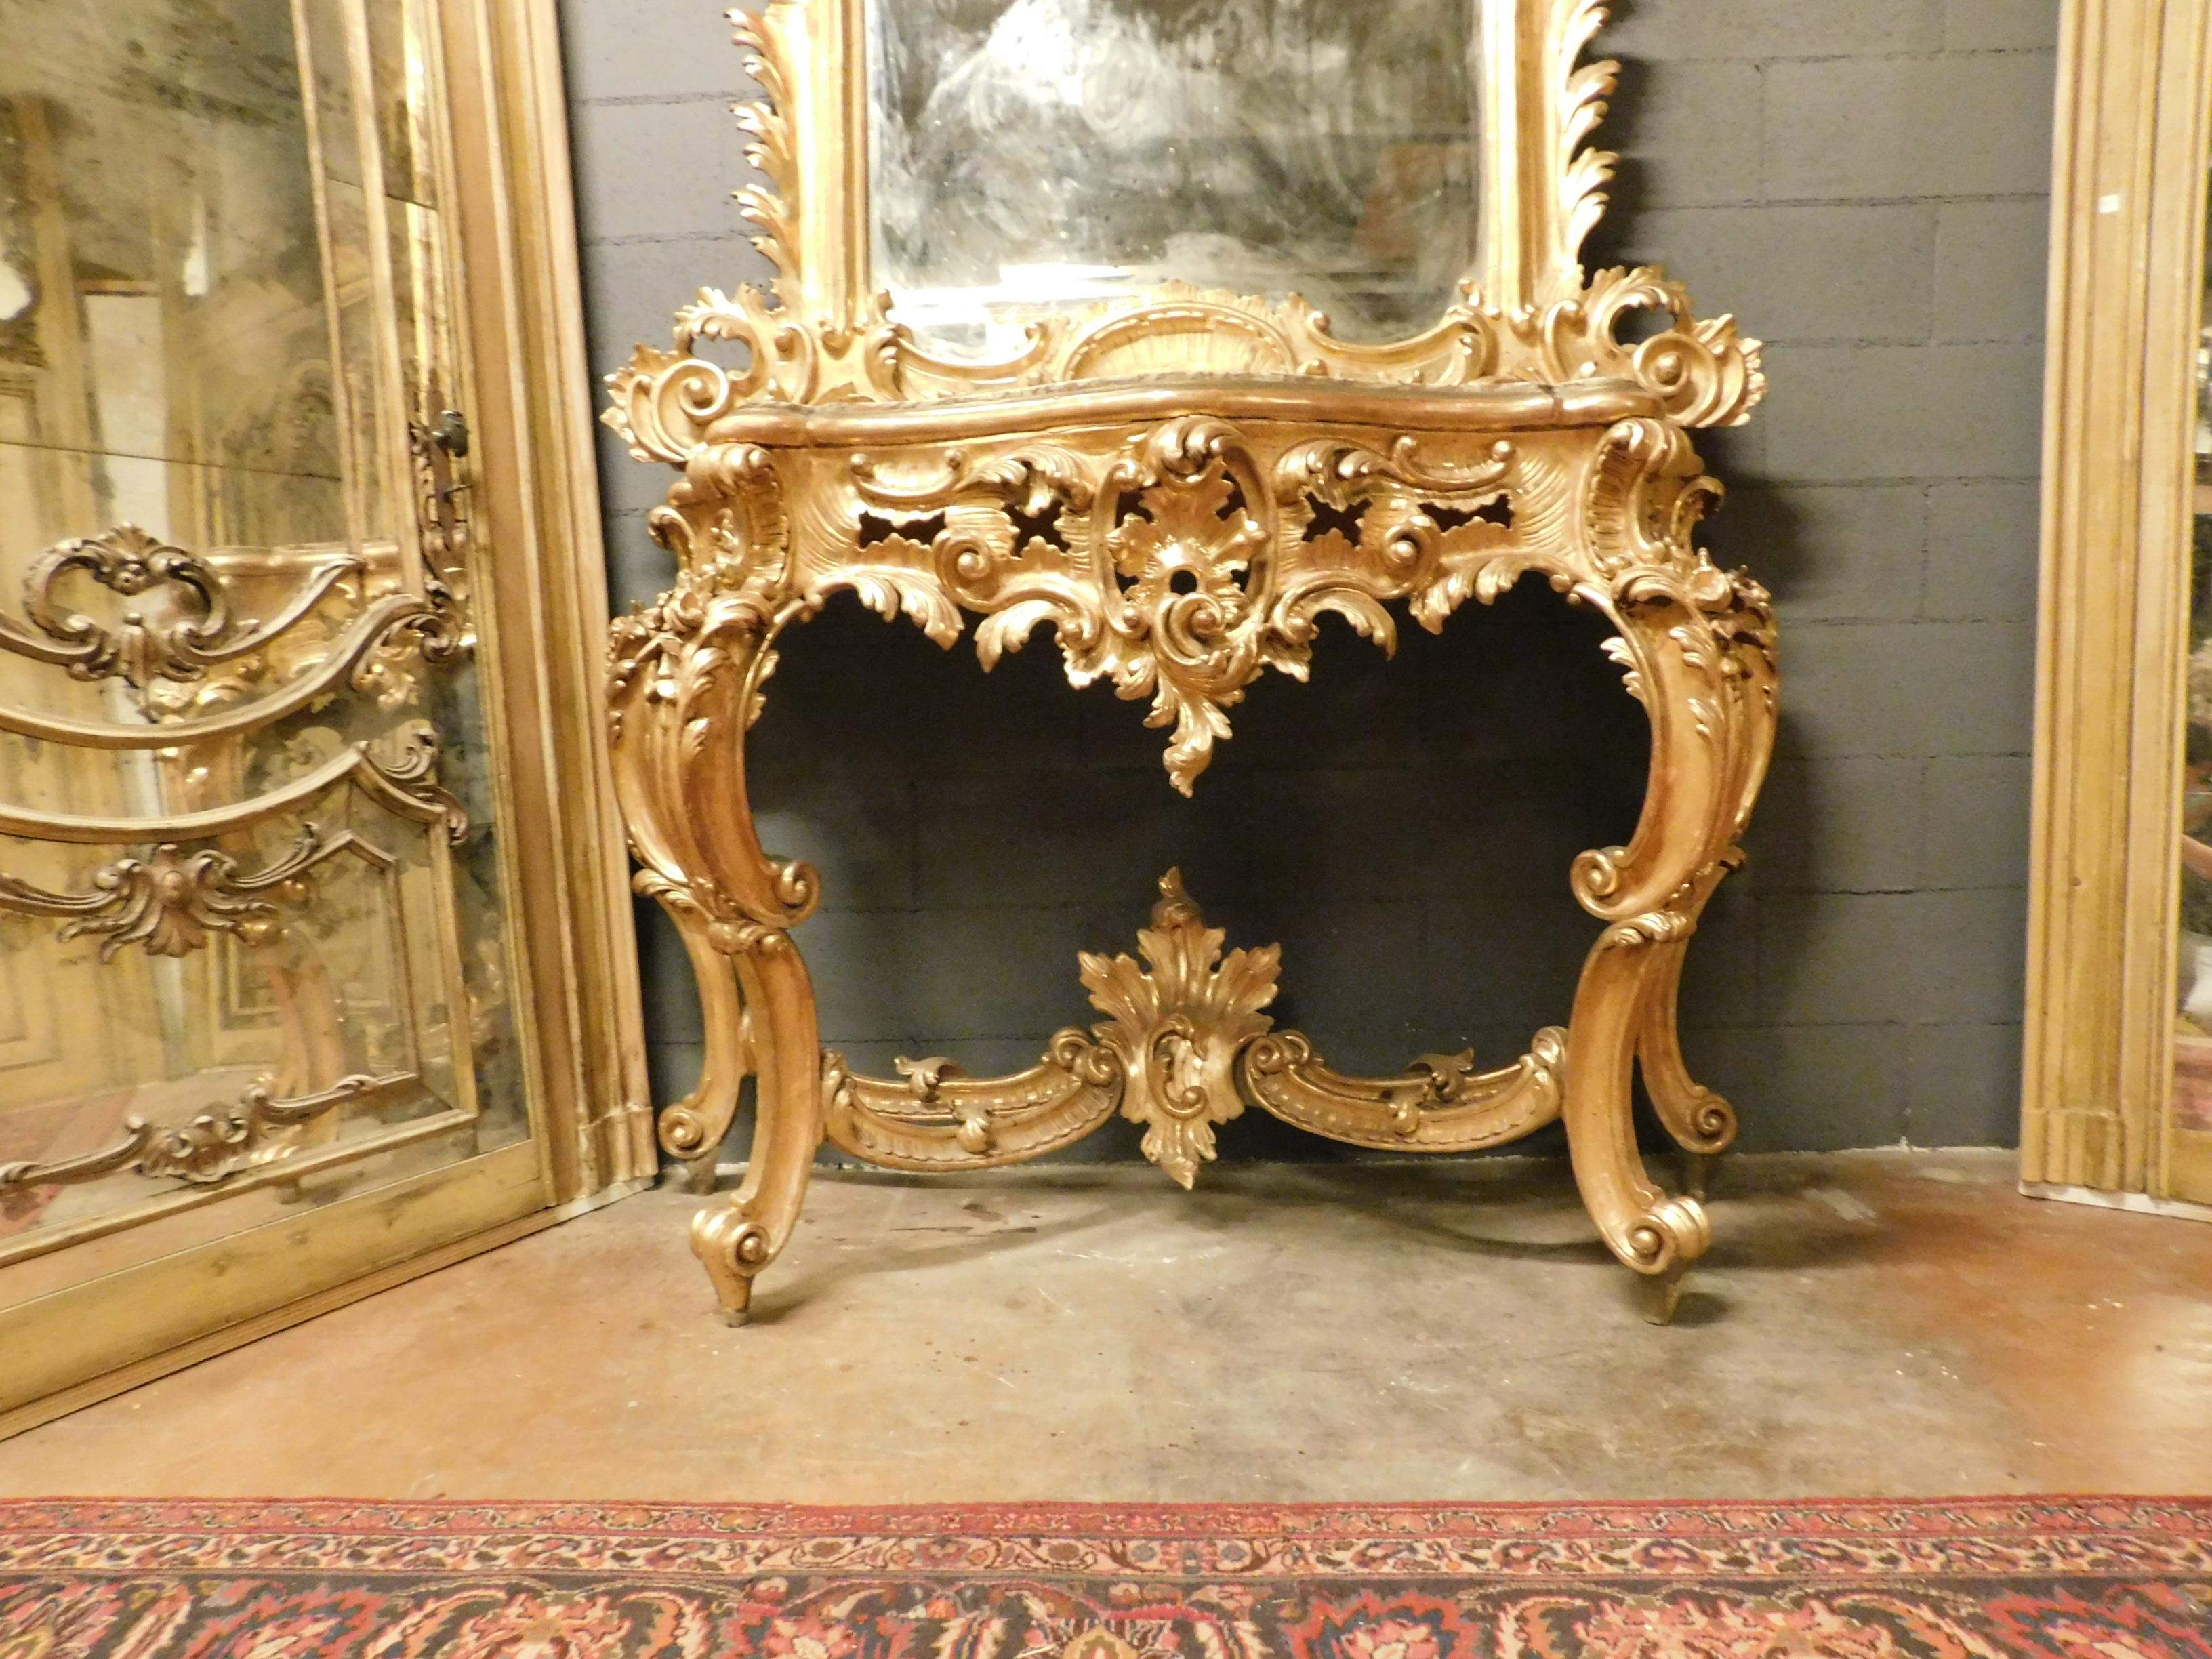 Gilt Antique Important Rich Gilded Wooden Console Mirror, Naples, 'Italy', 1700 For Sale